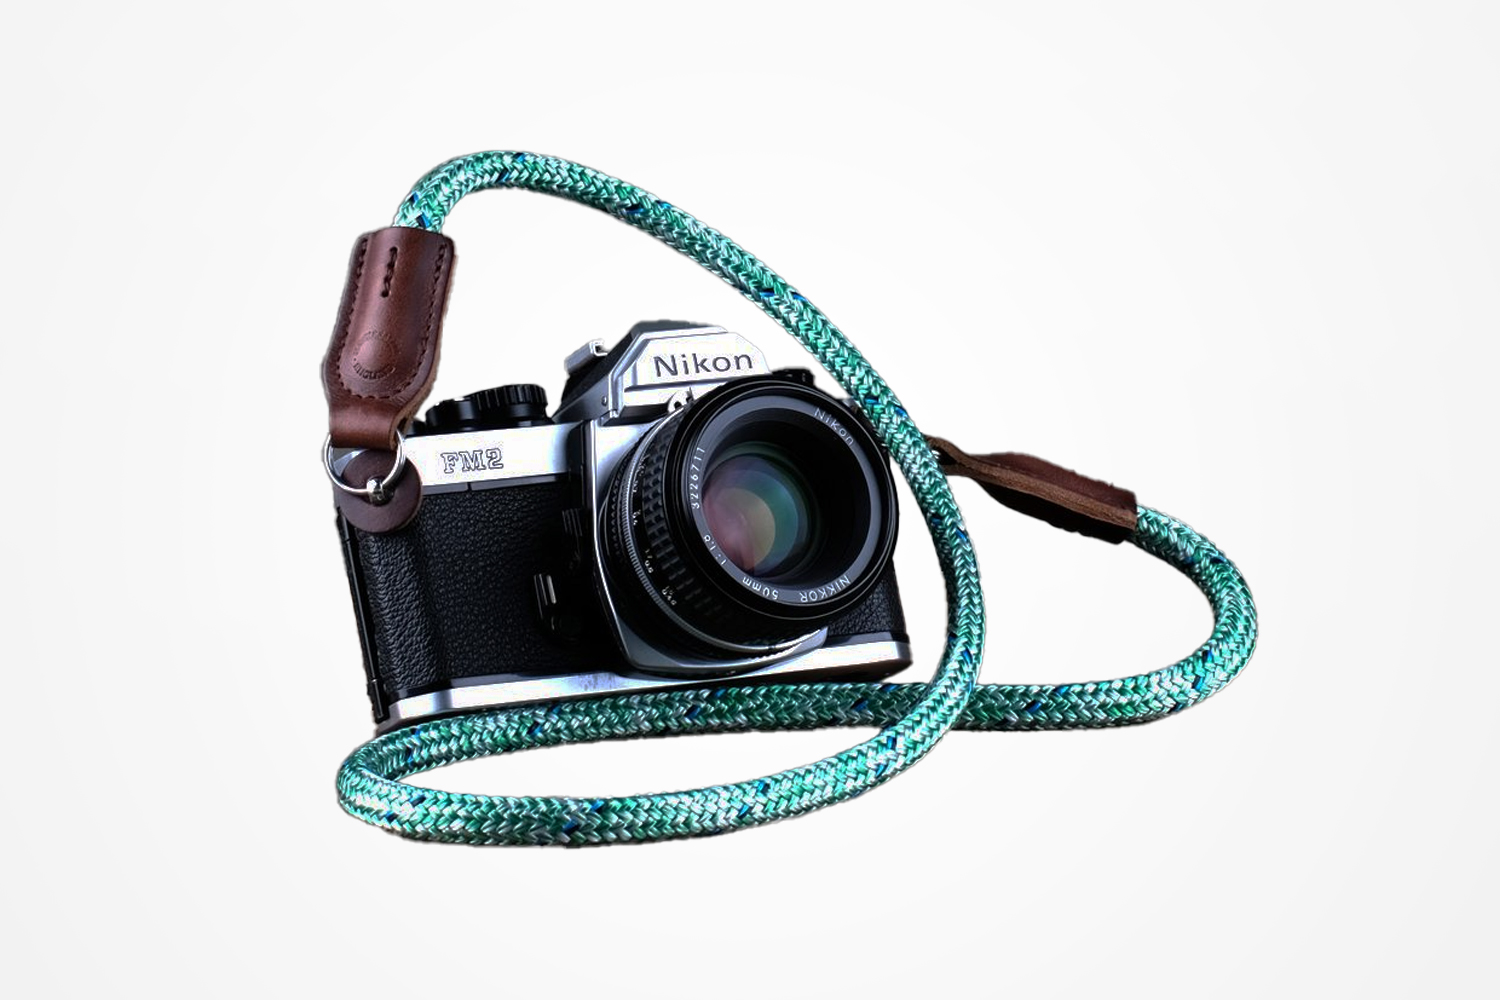 18 Best Gifts for Photographers this Year